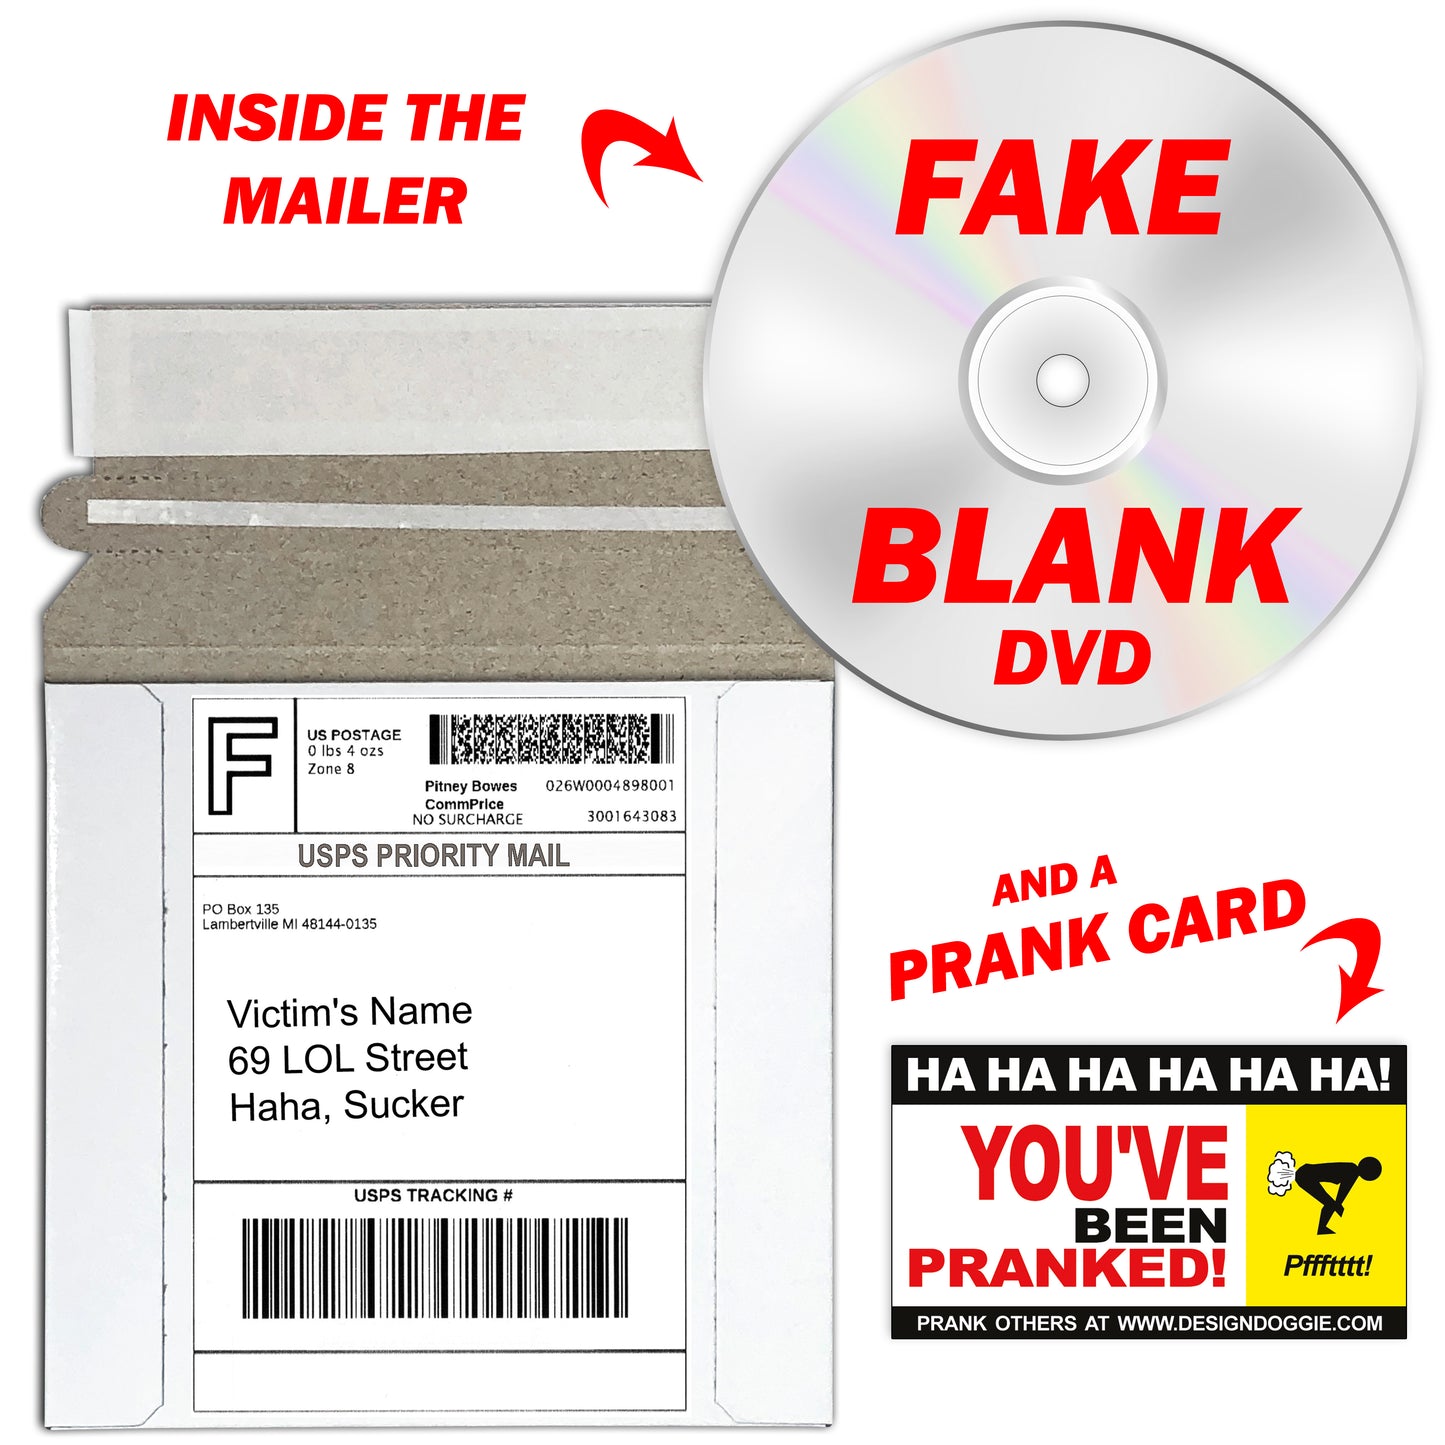 Animals Gone Wild Fake DVD mail prank gets sent directly to your victims 100% anonymously!